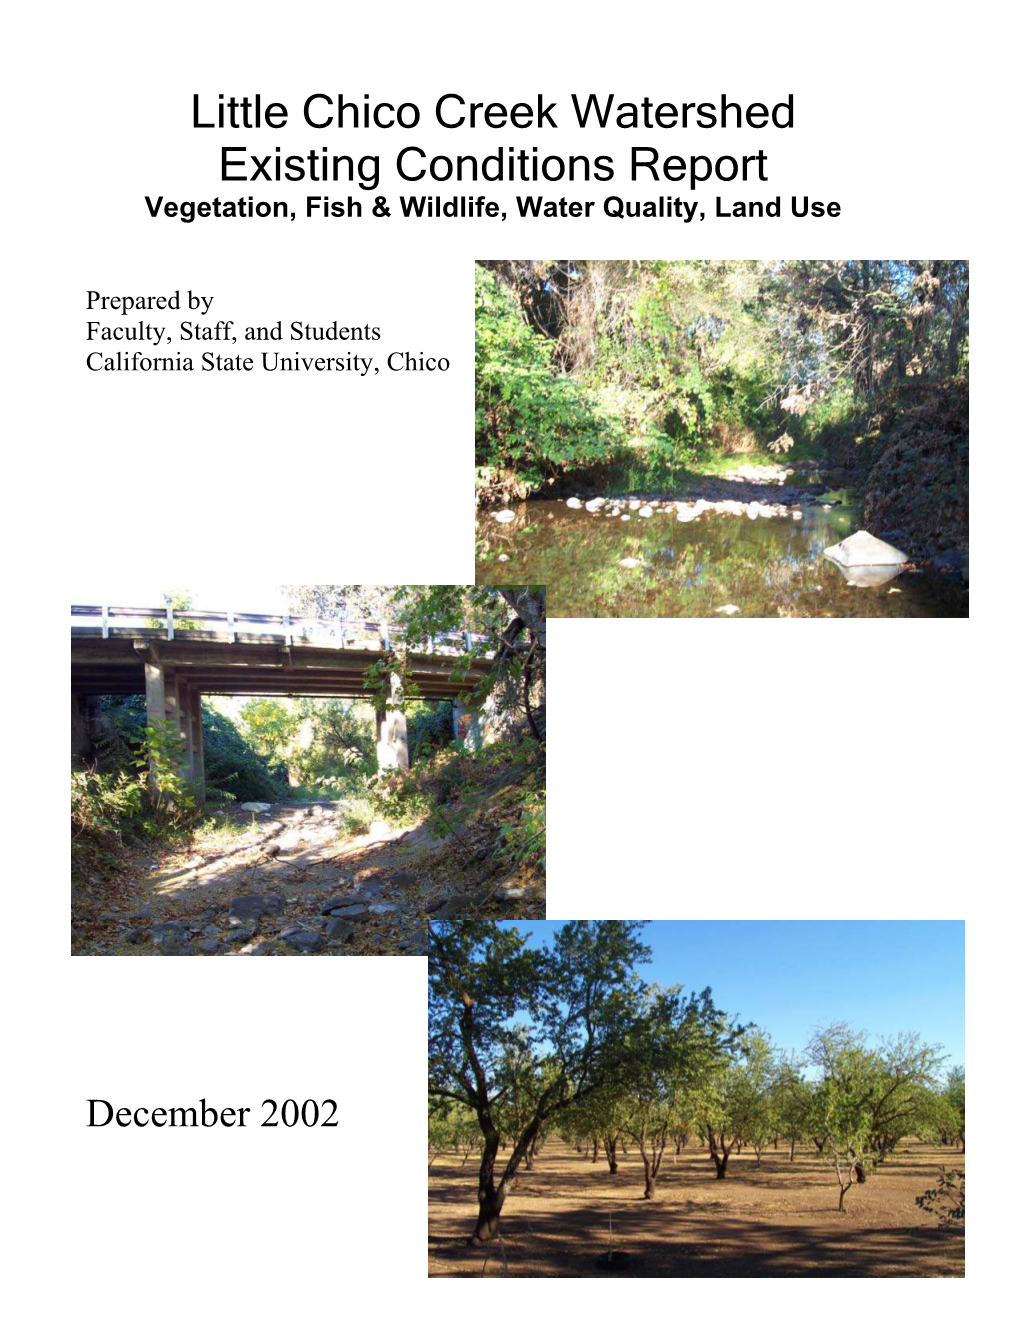 Little Chico Creek Watershed Existing Conditions Report Vegetation, Fish & Wildlife, Water Quality, Land Use